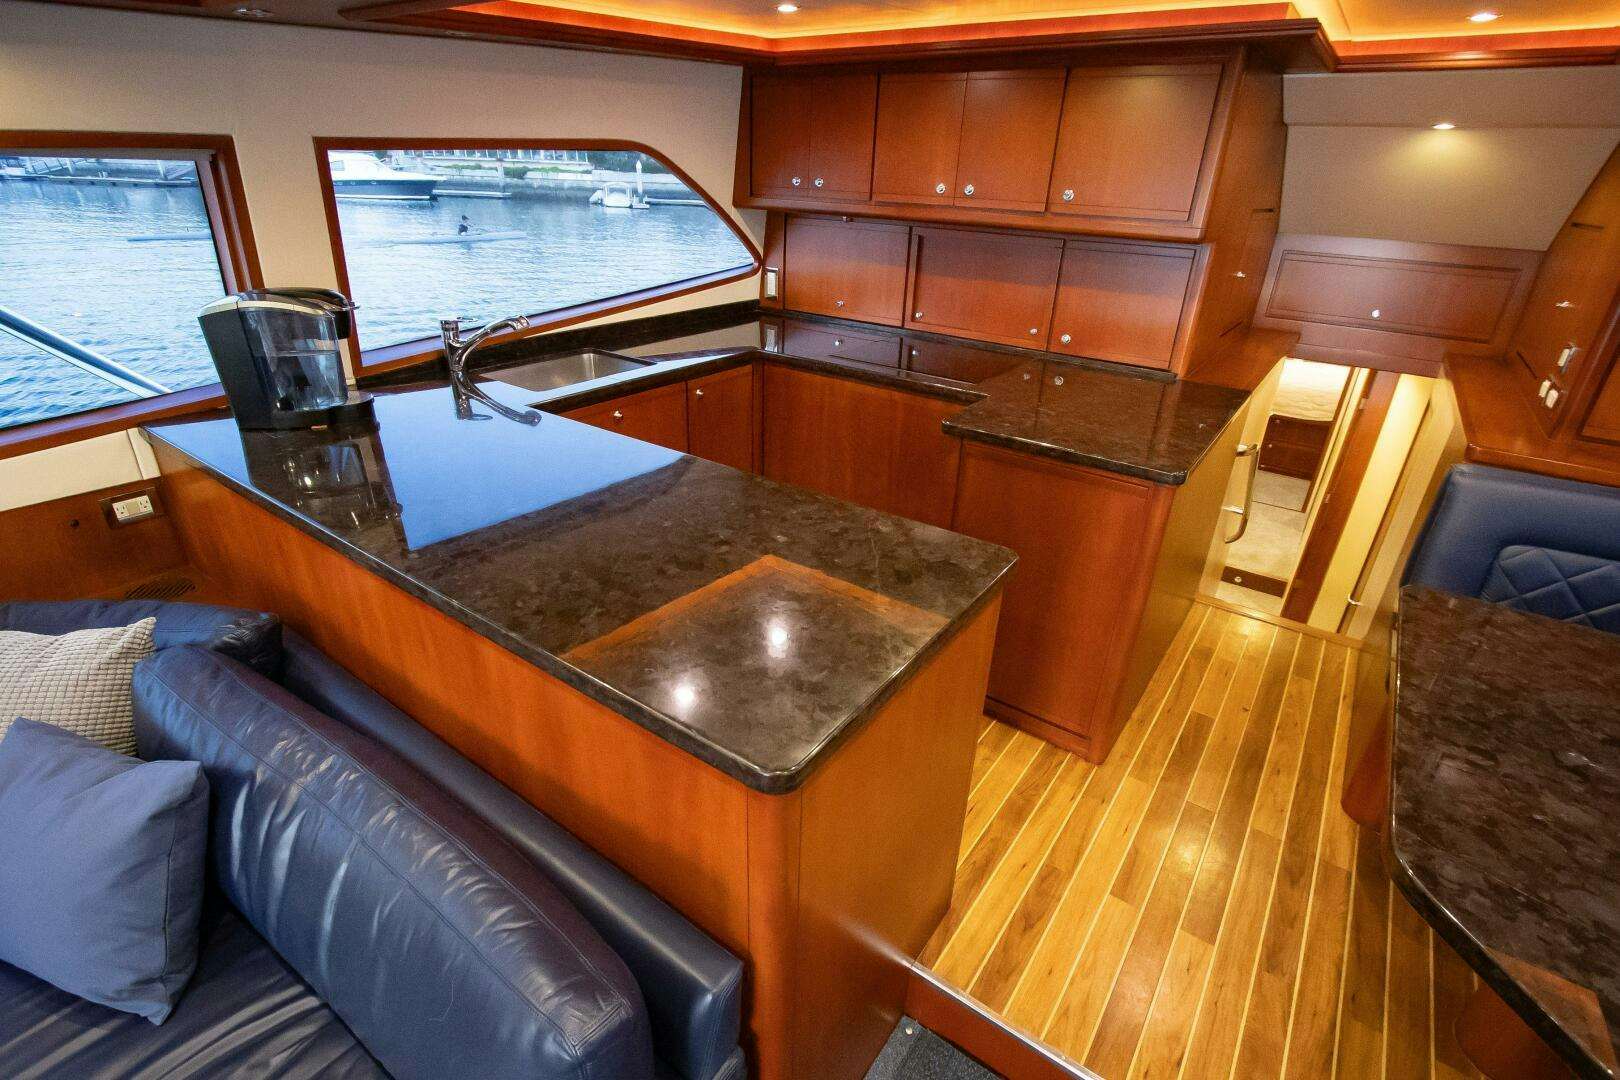 Valkyrie
Yacht for Sale